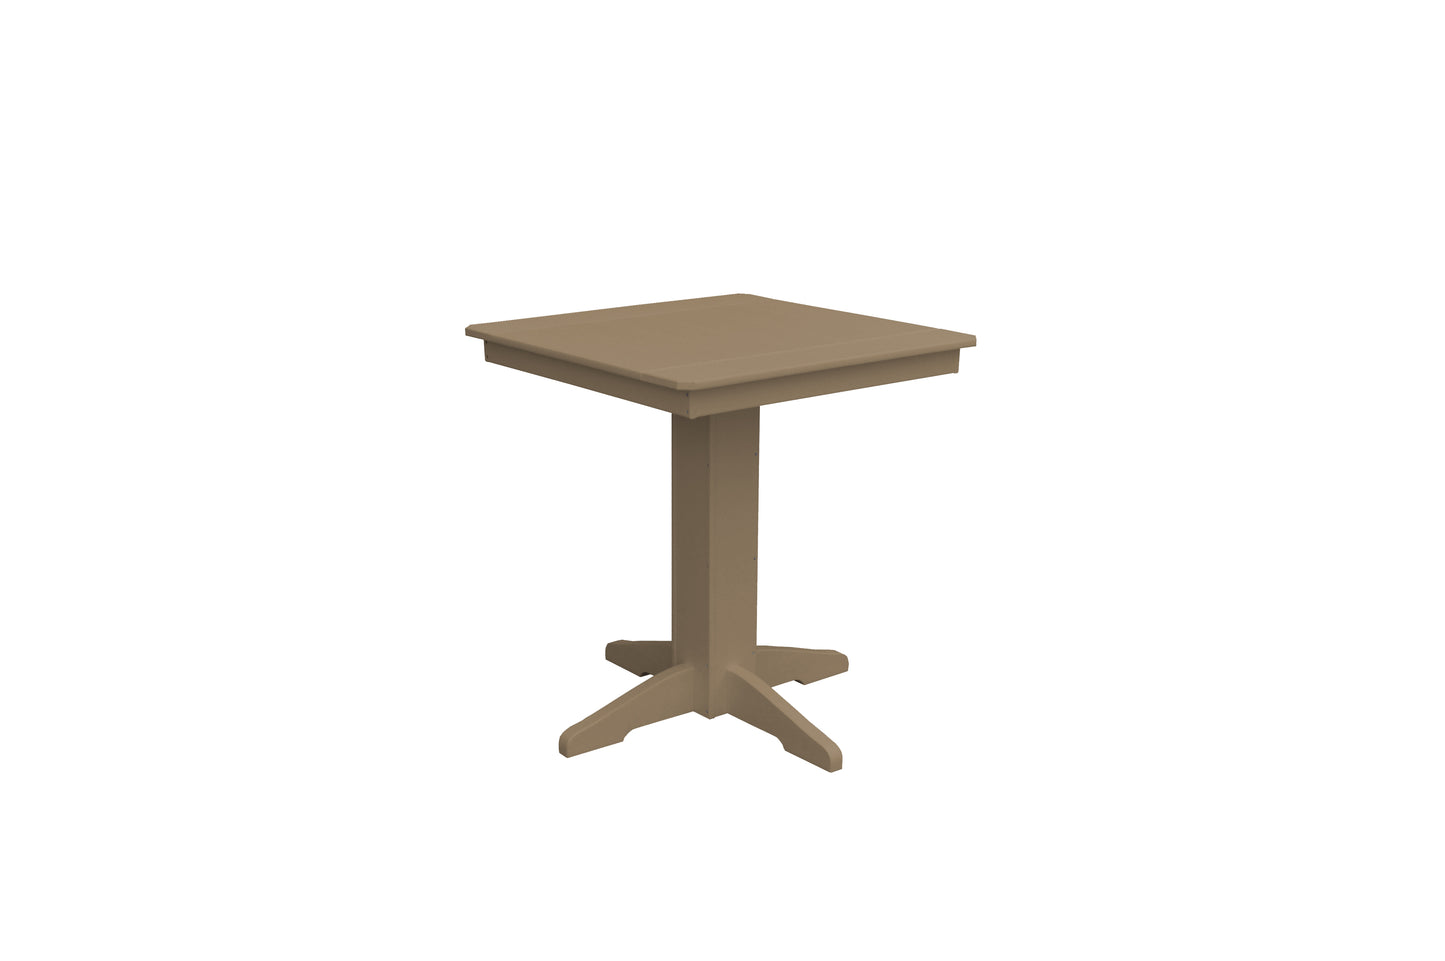 A&L Furniture Co. Recycled Plastic 33" Square Balcony Table (COUNTER HEIGHT)  - LEAD TIME TO SHIP 10 BUSINESS DAYS